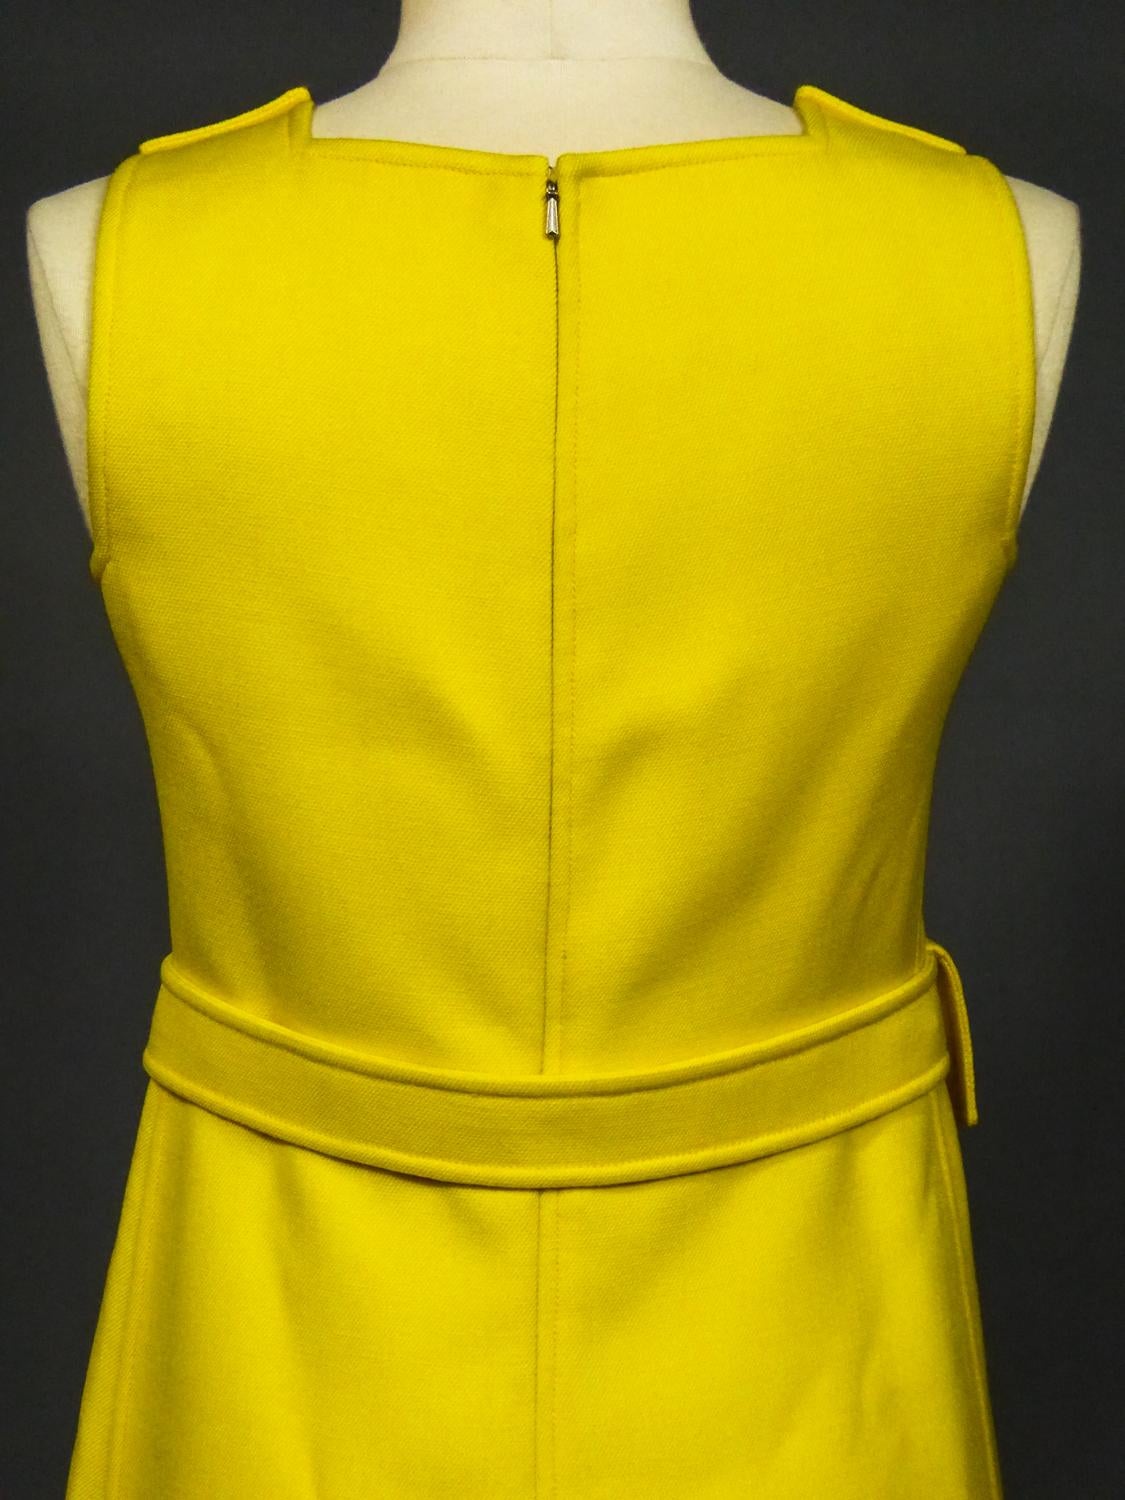 A Chasuble Mini Dress André Courrèges Haute Couture n° 102322 French Circa 1968 7